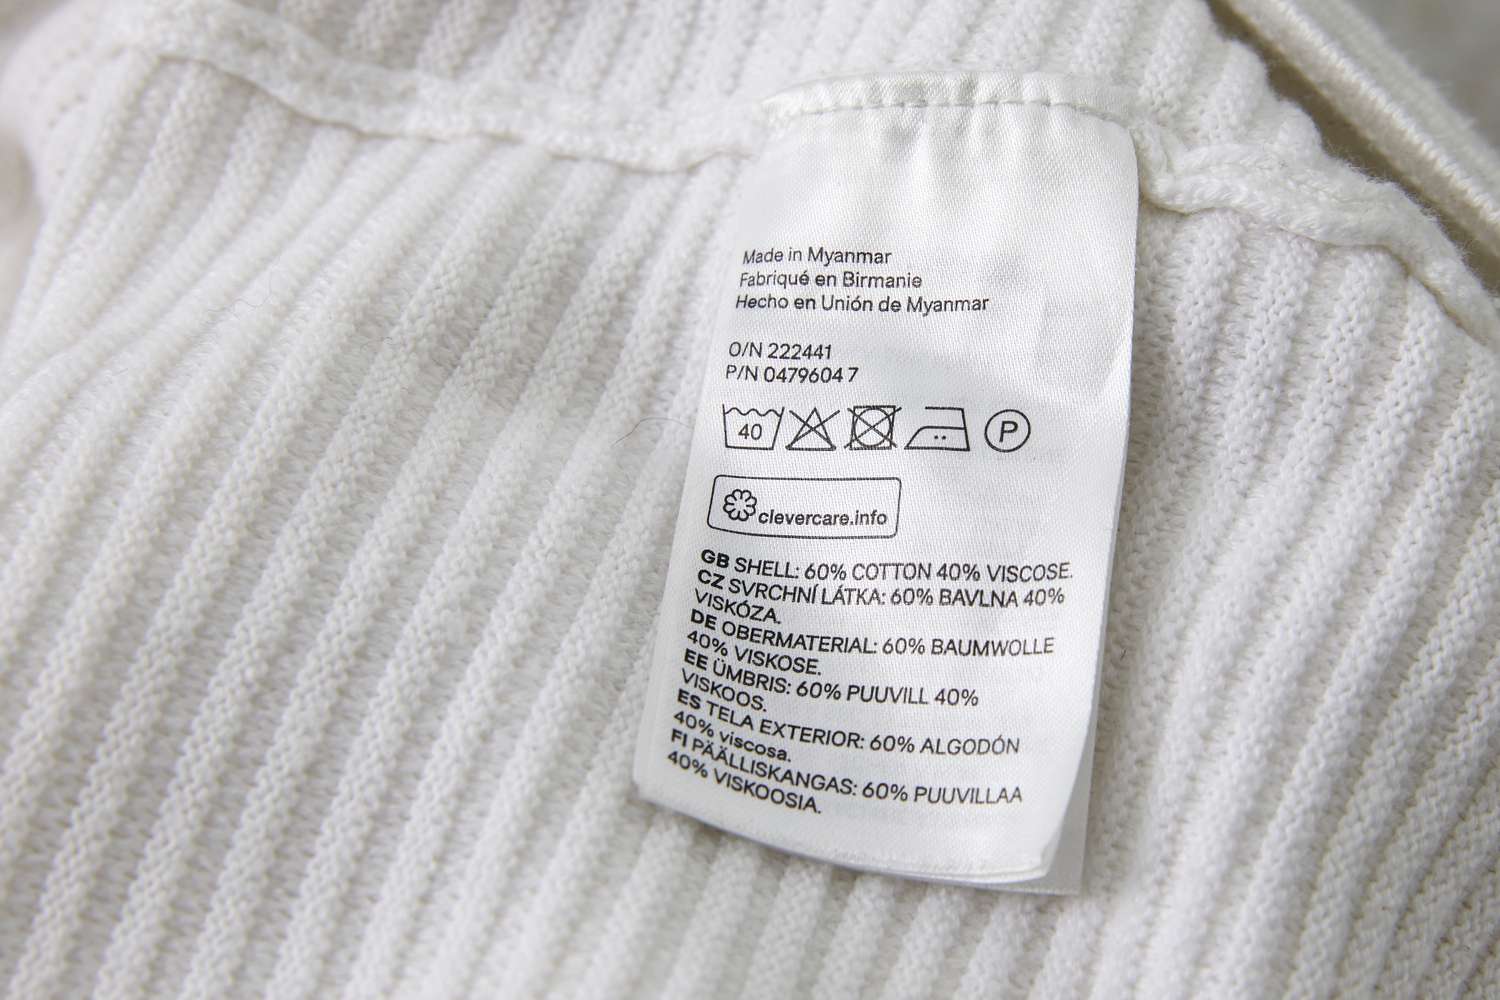 care label on a garment